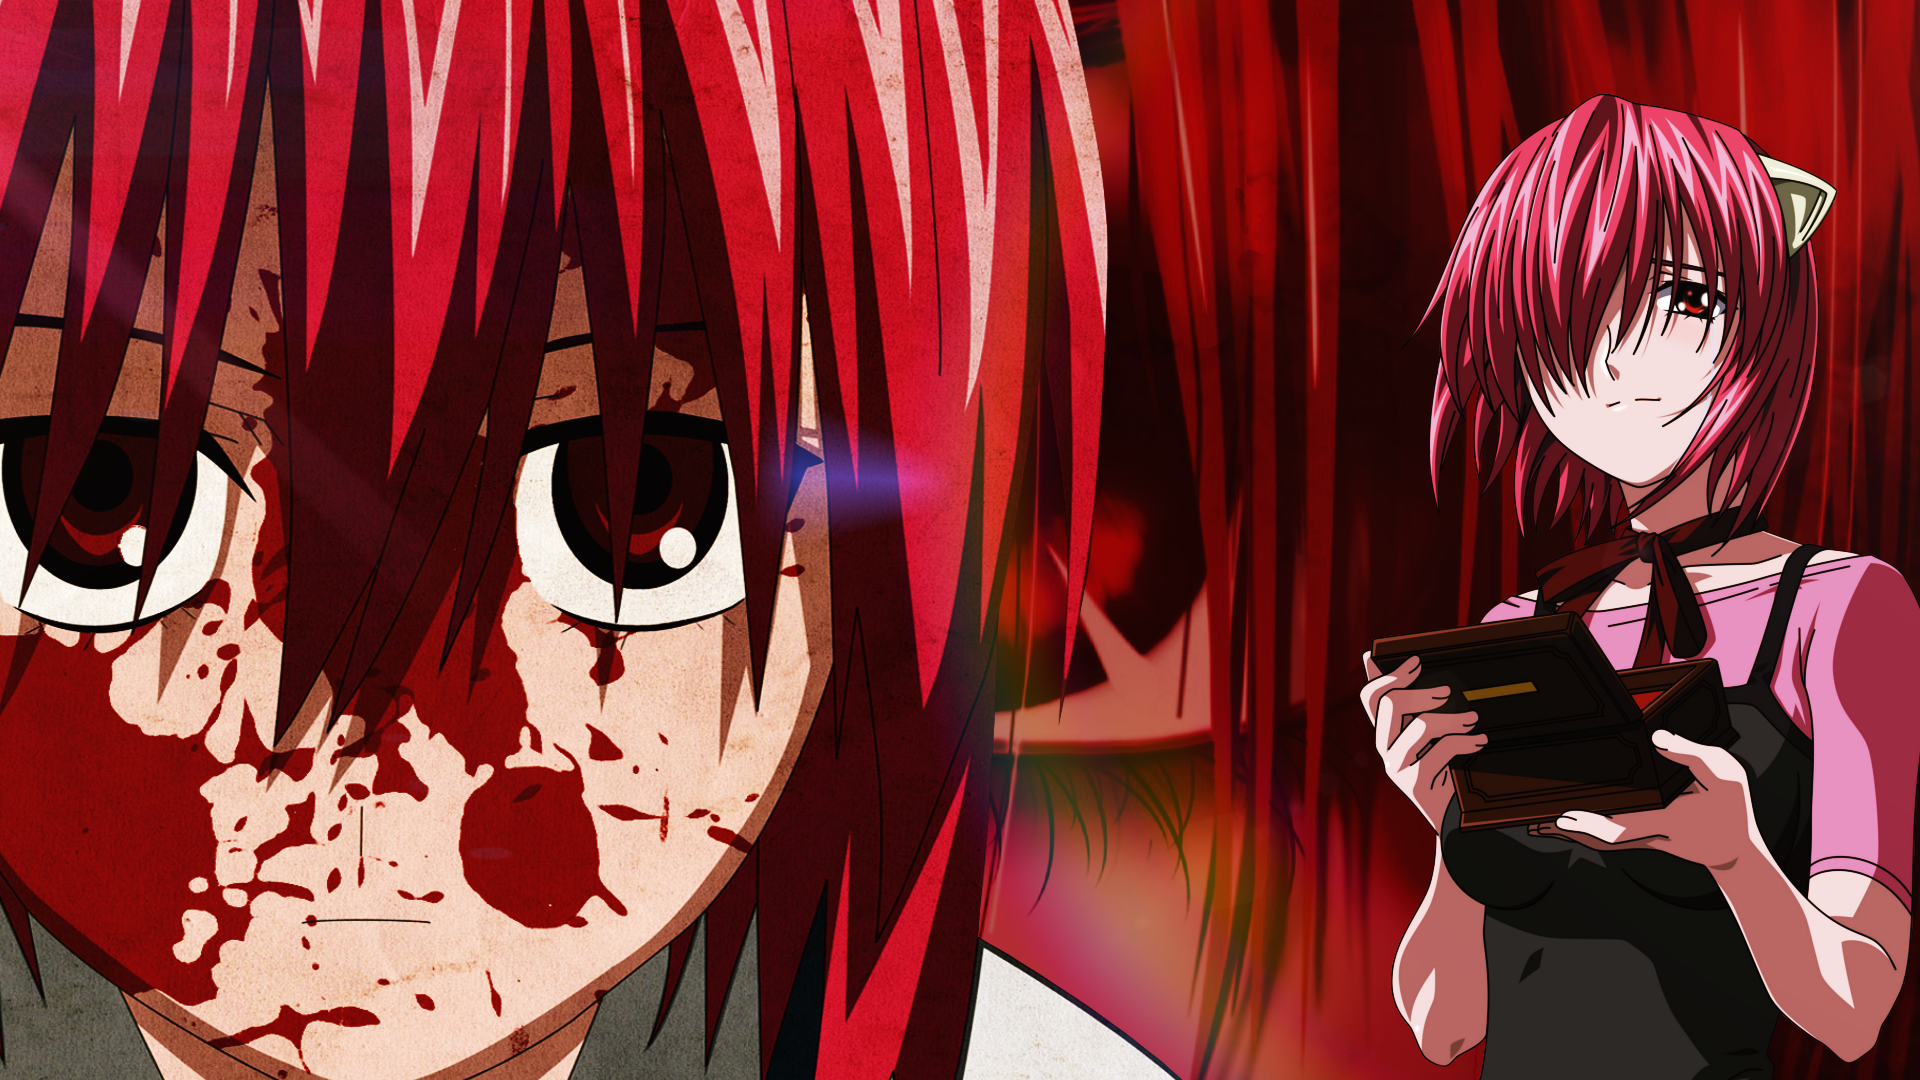 Wallpaper From The Anime Elfen Lied I Didn T Make These